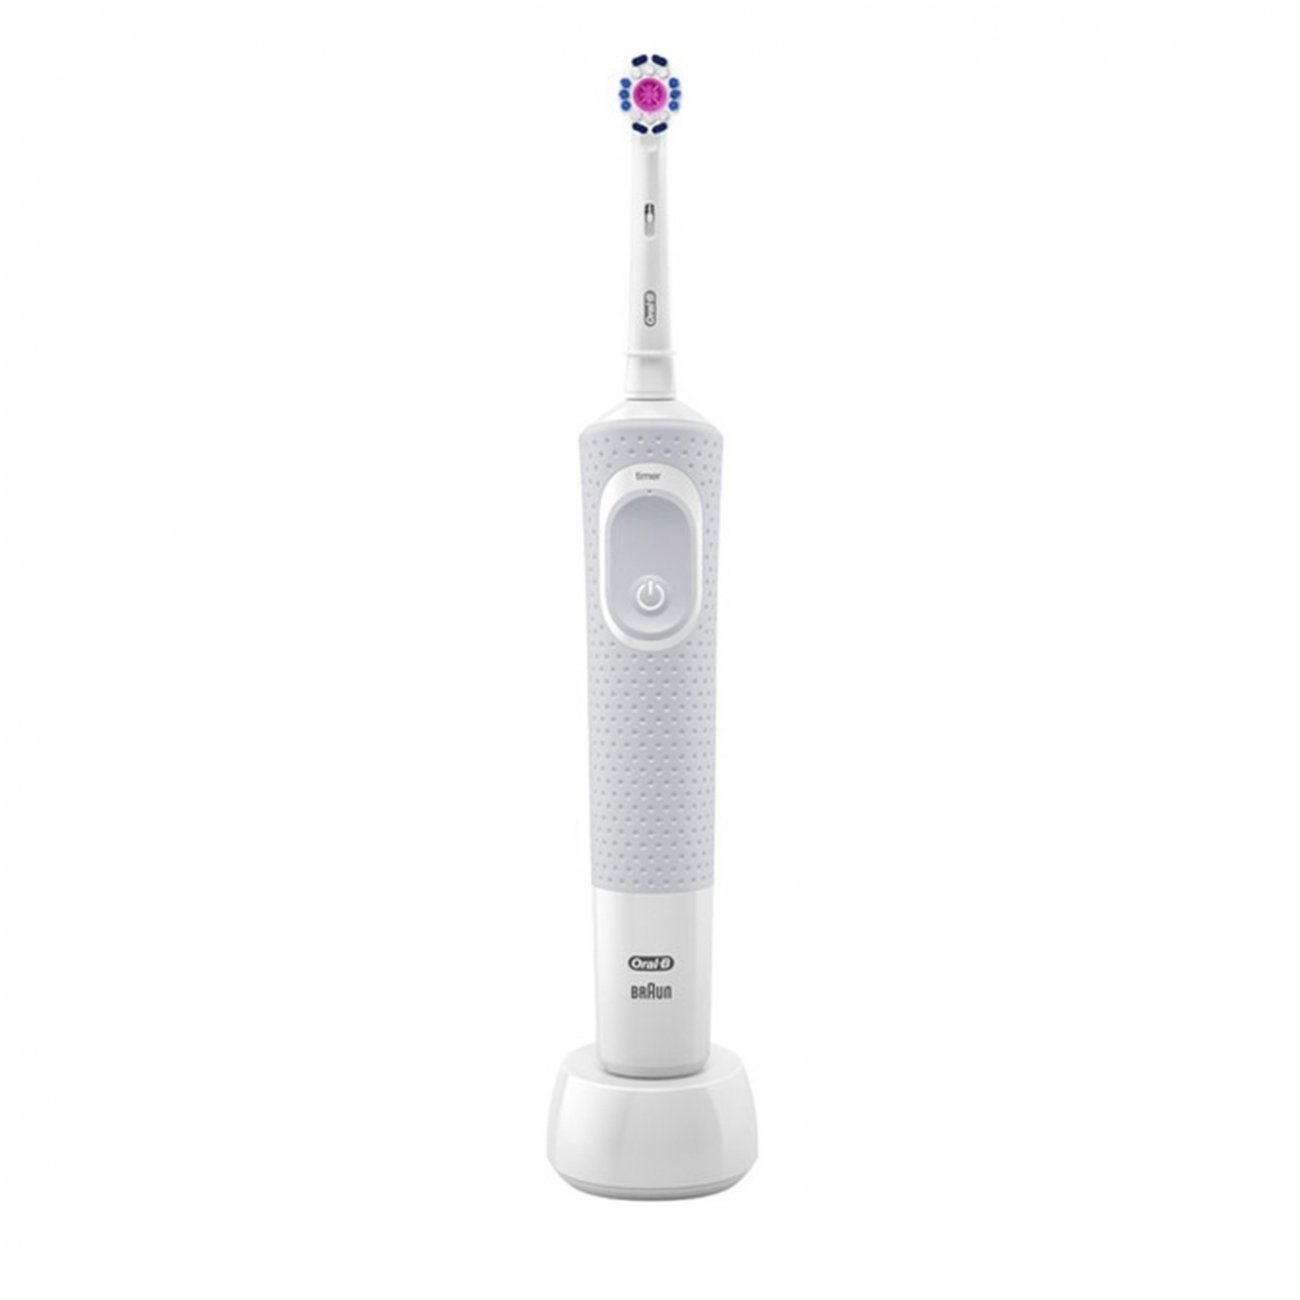 Voorkeur Absoluut Smeltend Buy Oral-B Vitality 100 3DWhite Electric Toothbrush · USA